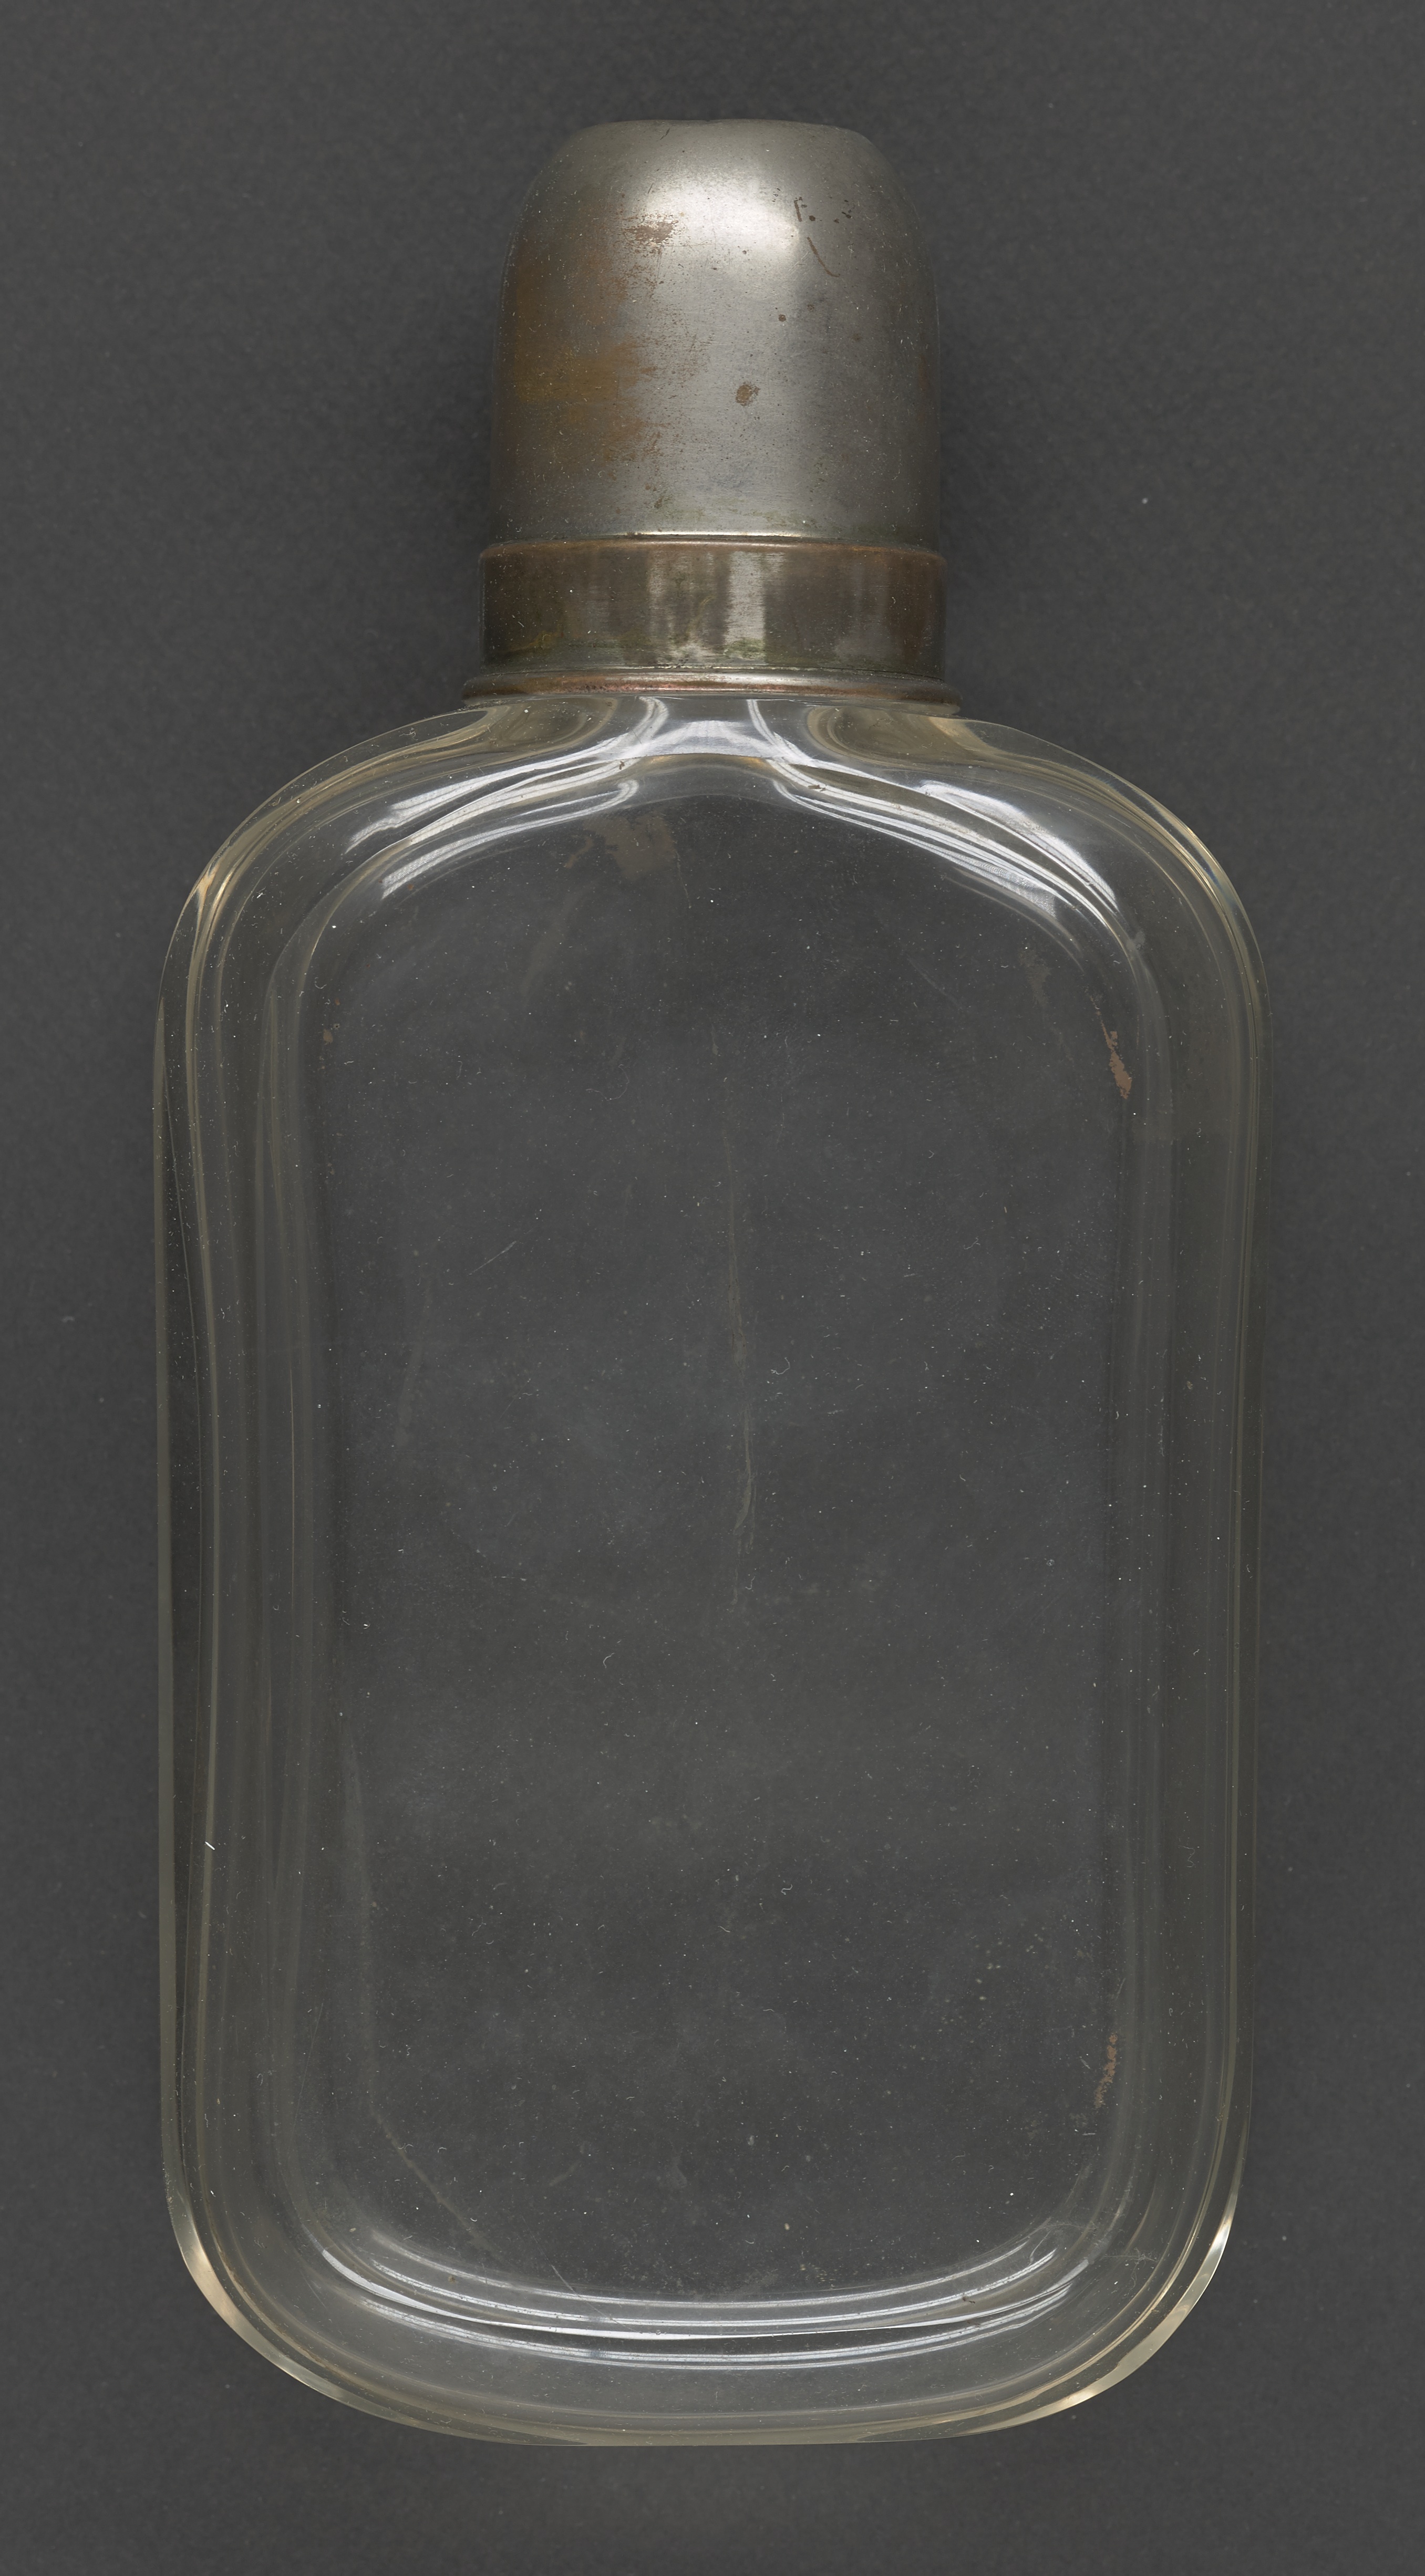 Charles Dickens' flask